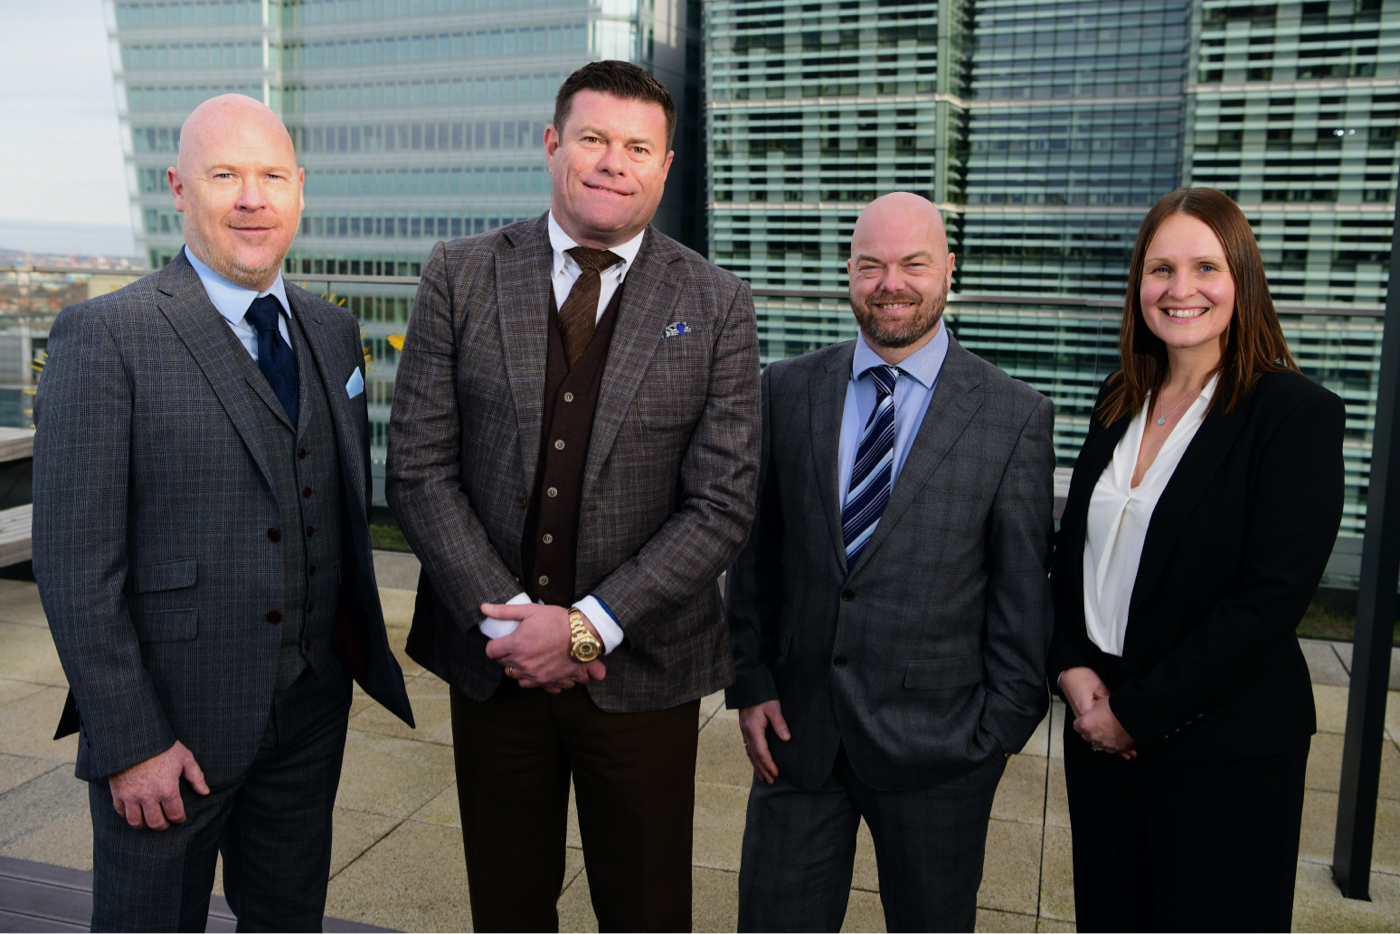 Finance 4 Business reveals new ownership structure